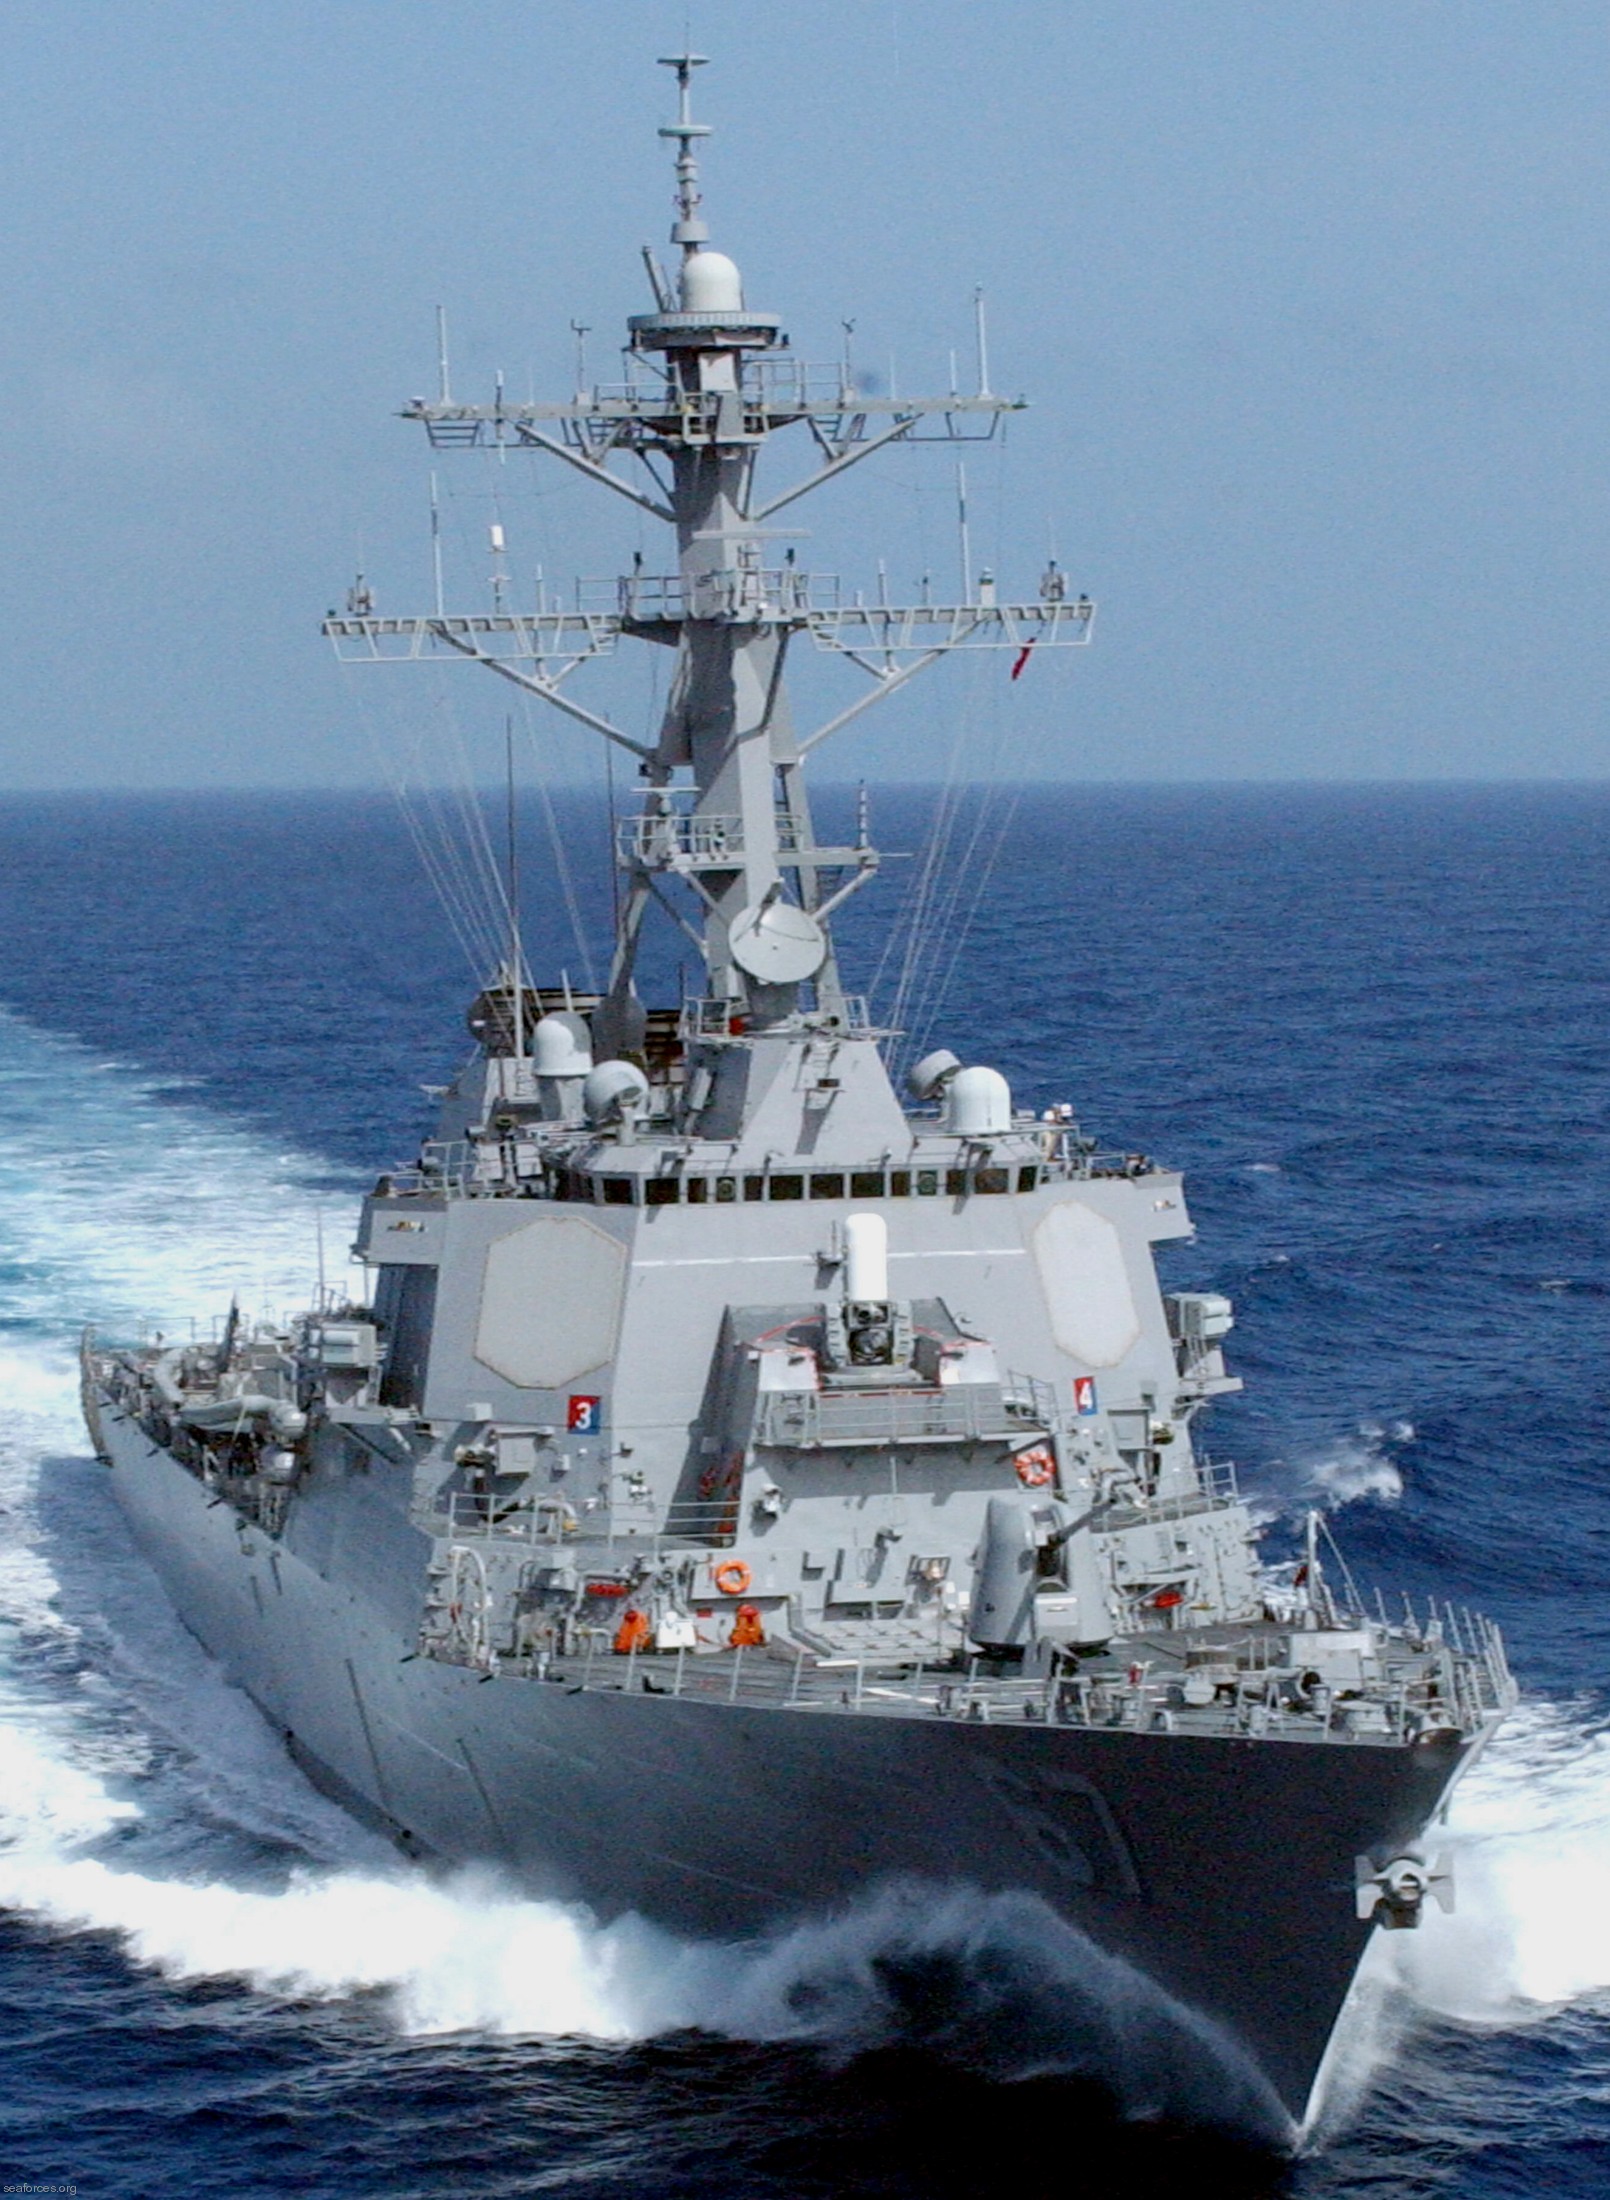 ddg-67 uss cole guided missile destroyer arleigh burke class navy aegis 47